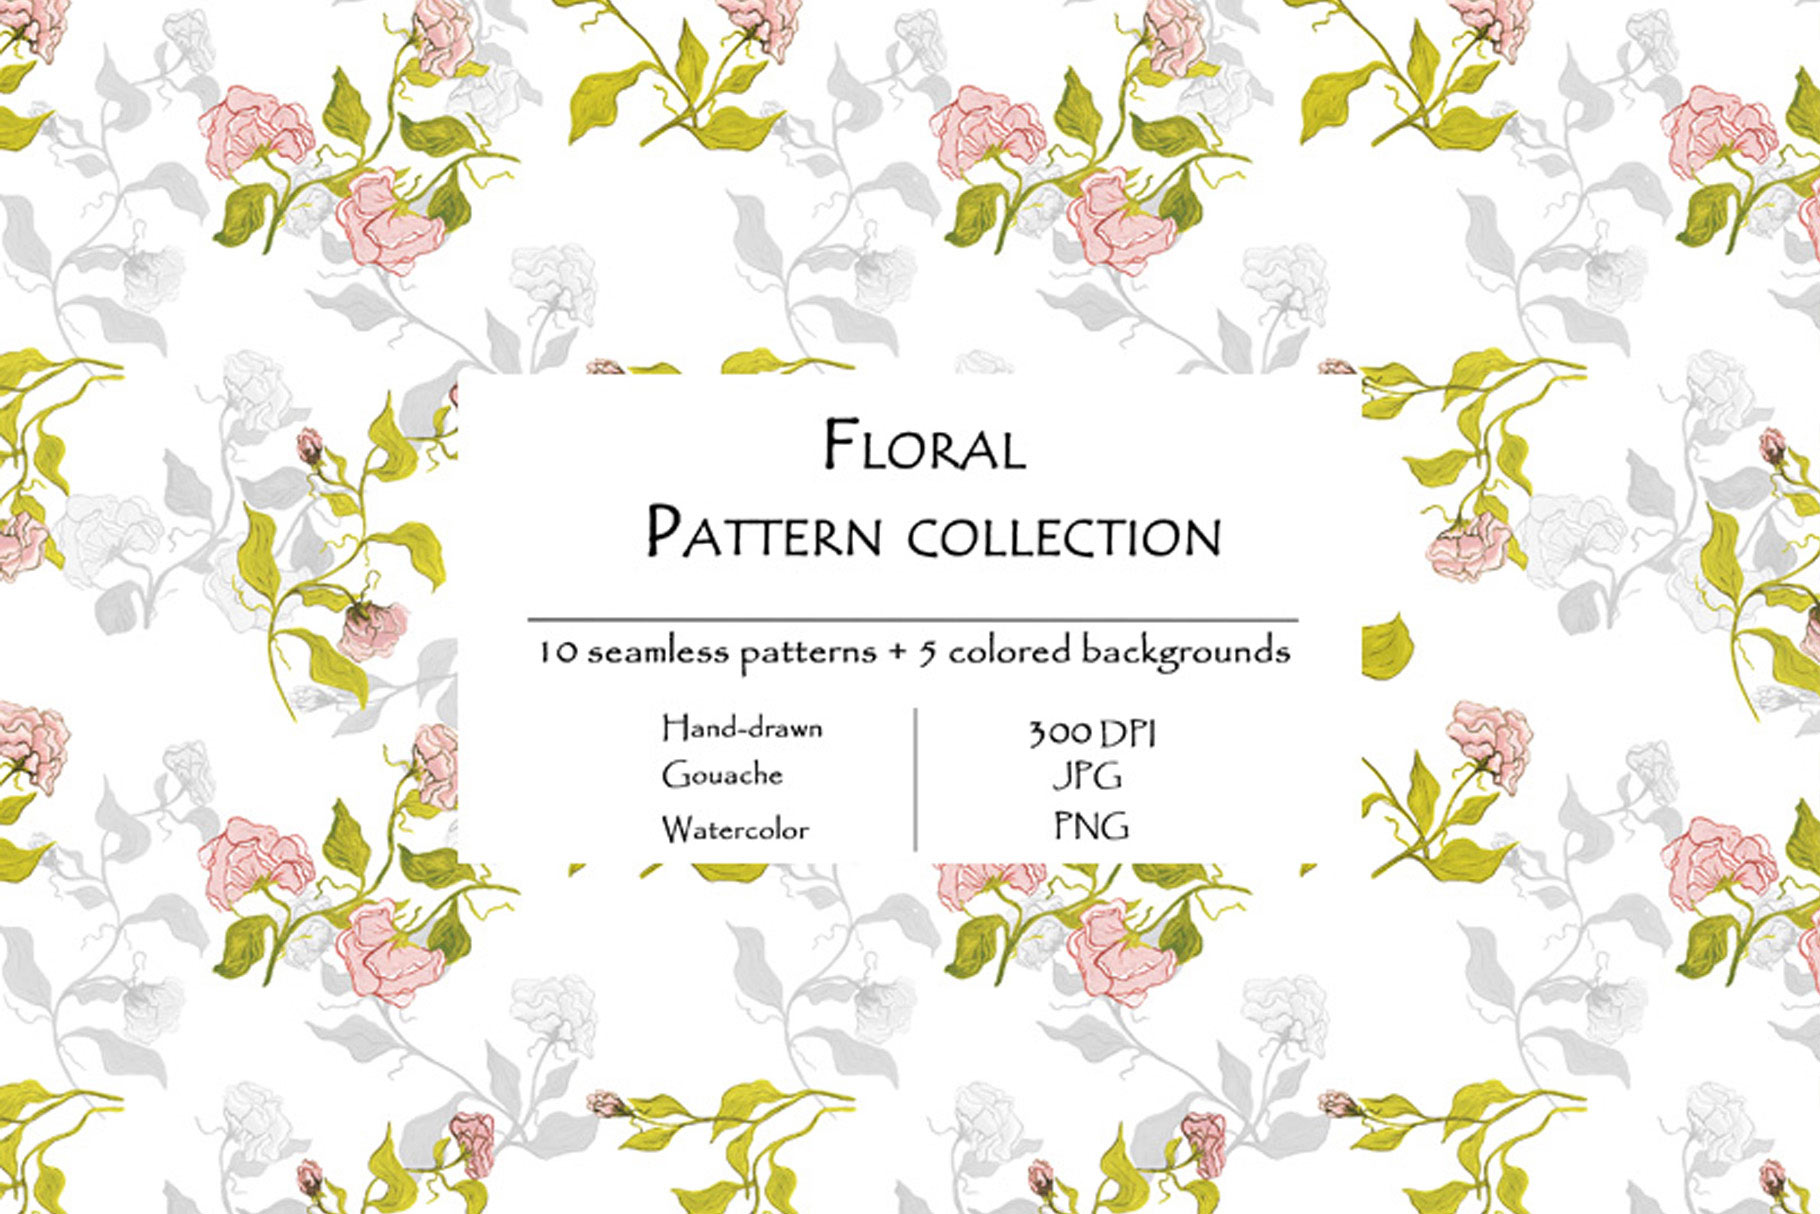 Floral Pattern Collection Of 10 Seamless Patterns And 5 Colored Backgrounds Leaves.